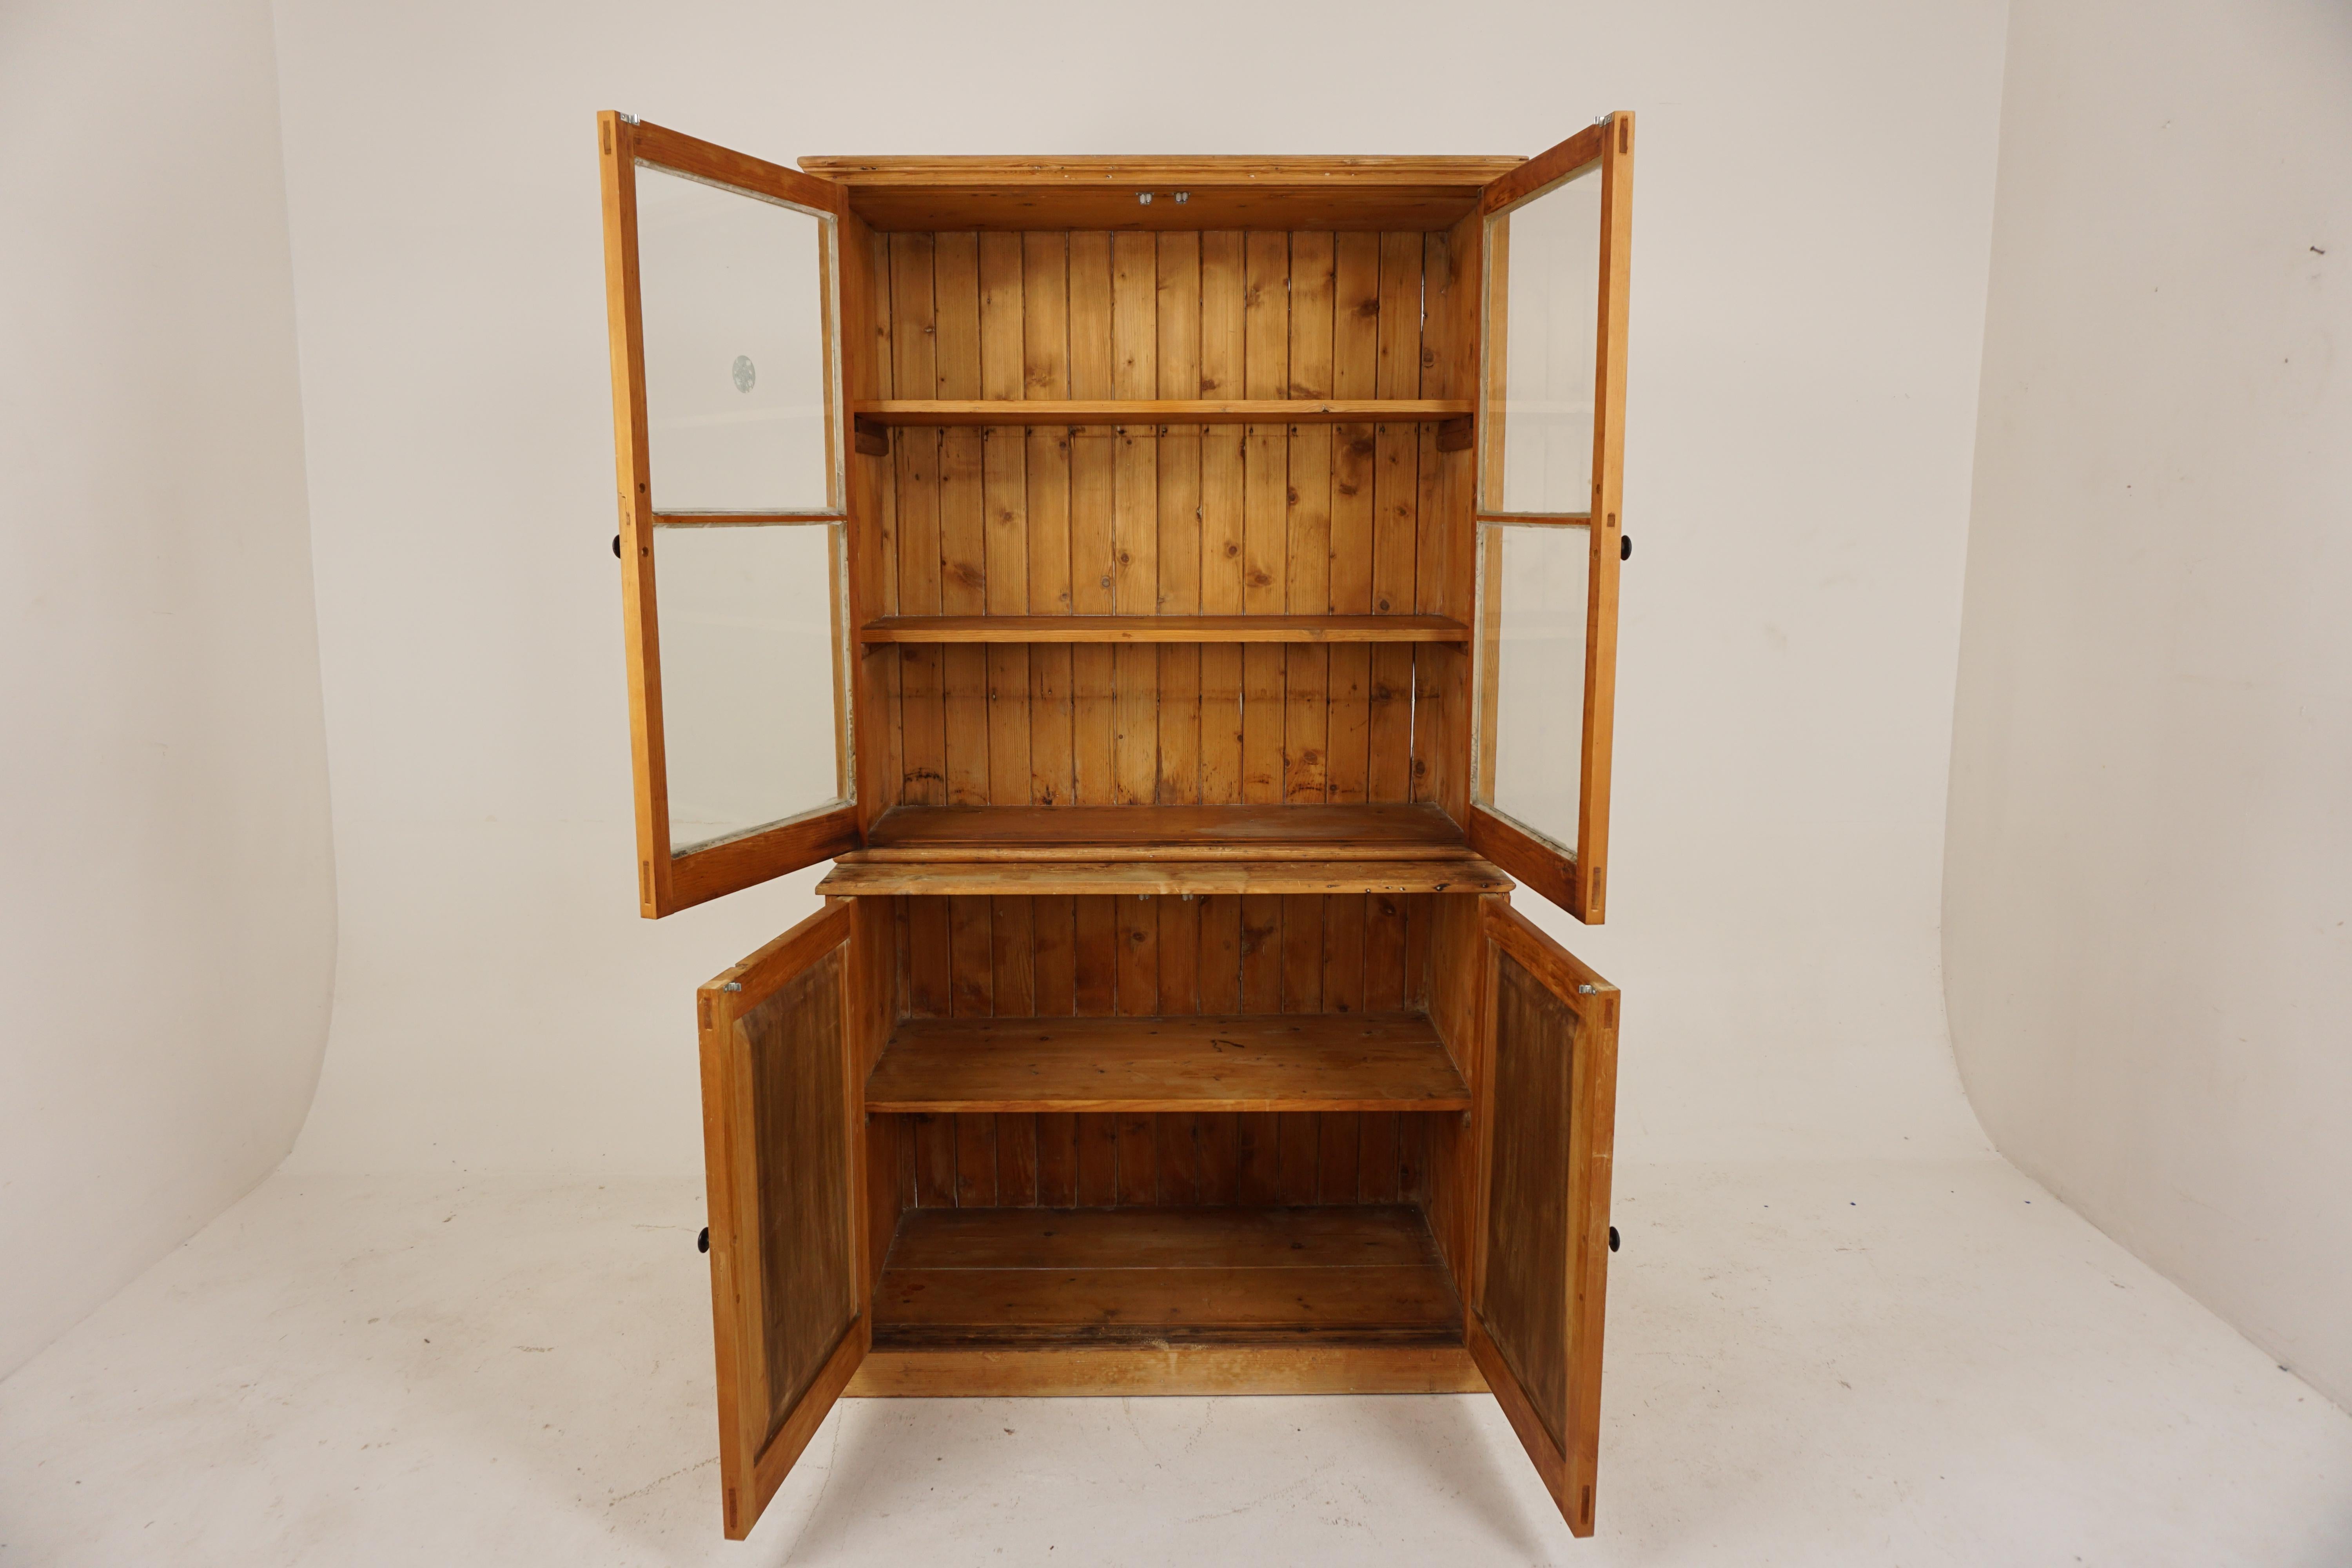 Ant. Victorian pine kitchen dresser, pantry cupboard, farmhouse buffet and hutch, Scotland 1880, H738

Scotland 1880
Solid Pine
Original Finish
Moulded Cornice on top
Pair of original glass doors underneath
Three adjustable pine shelves